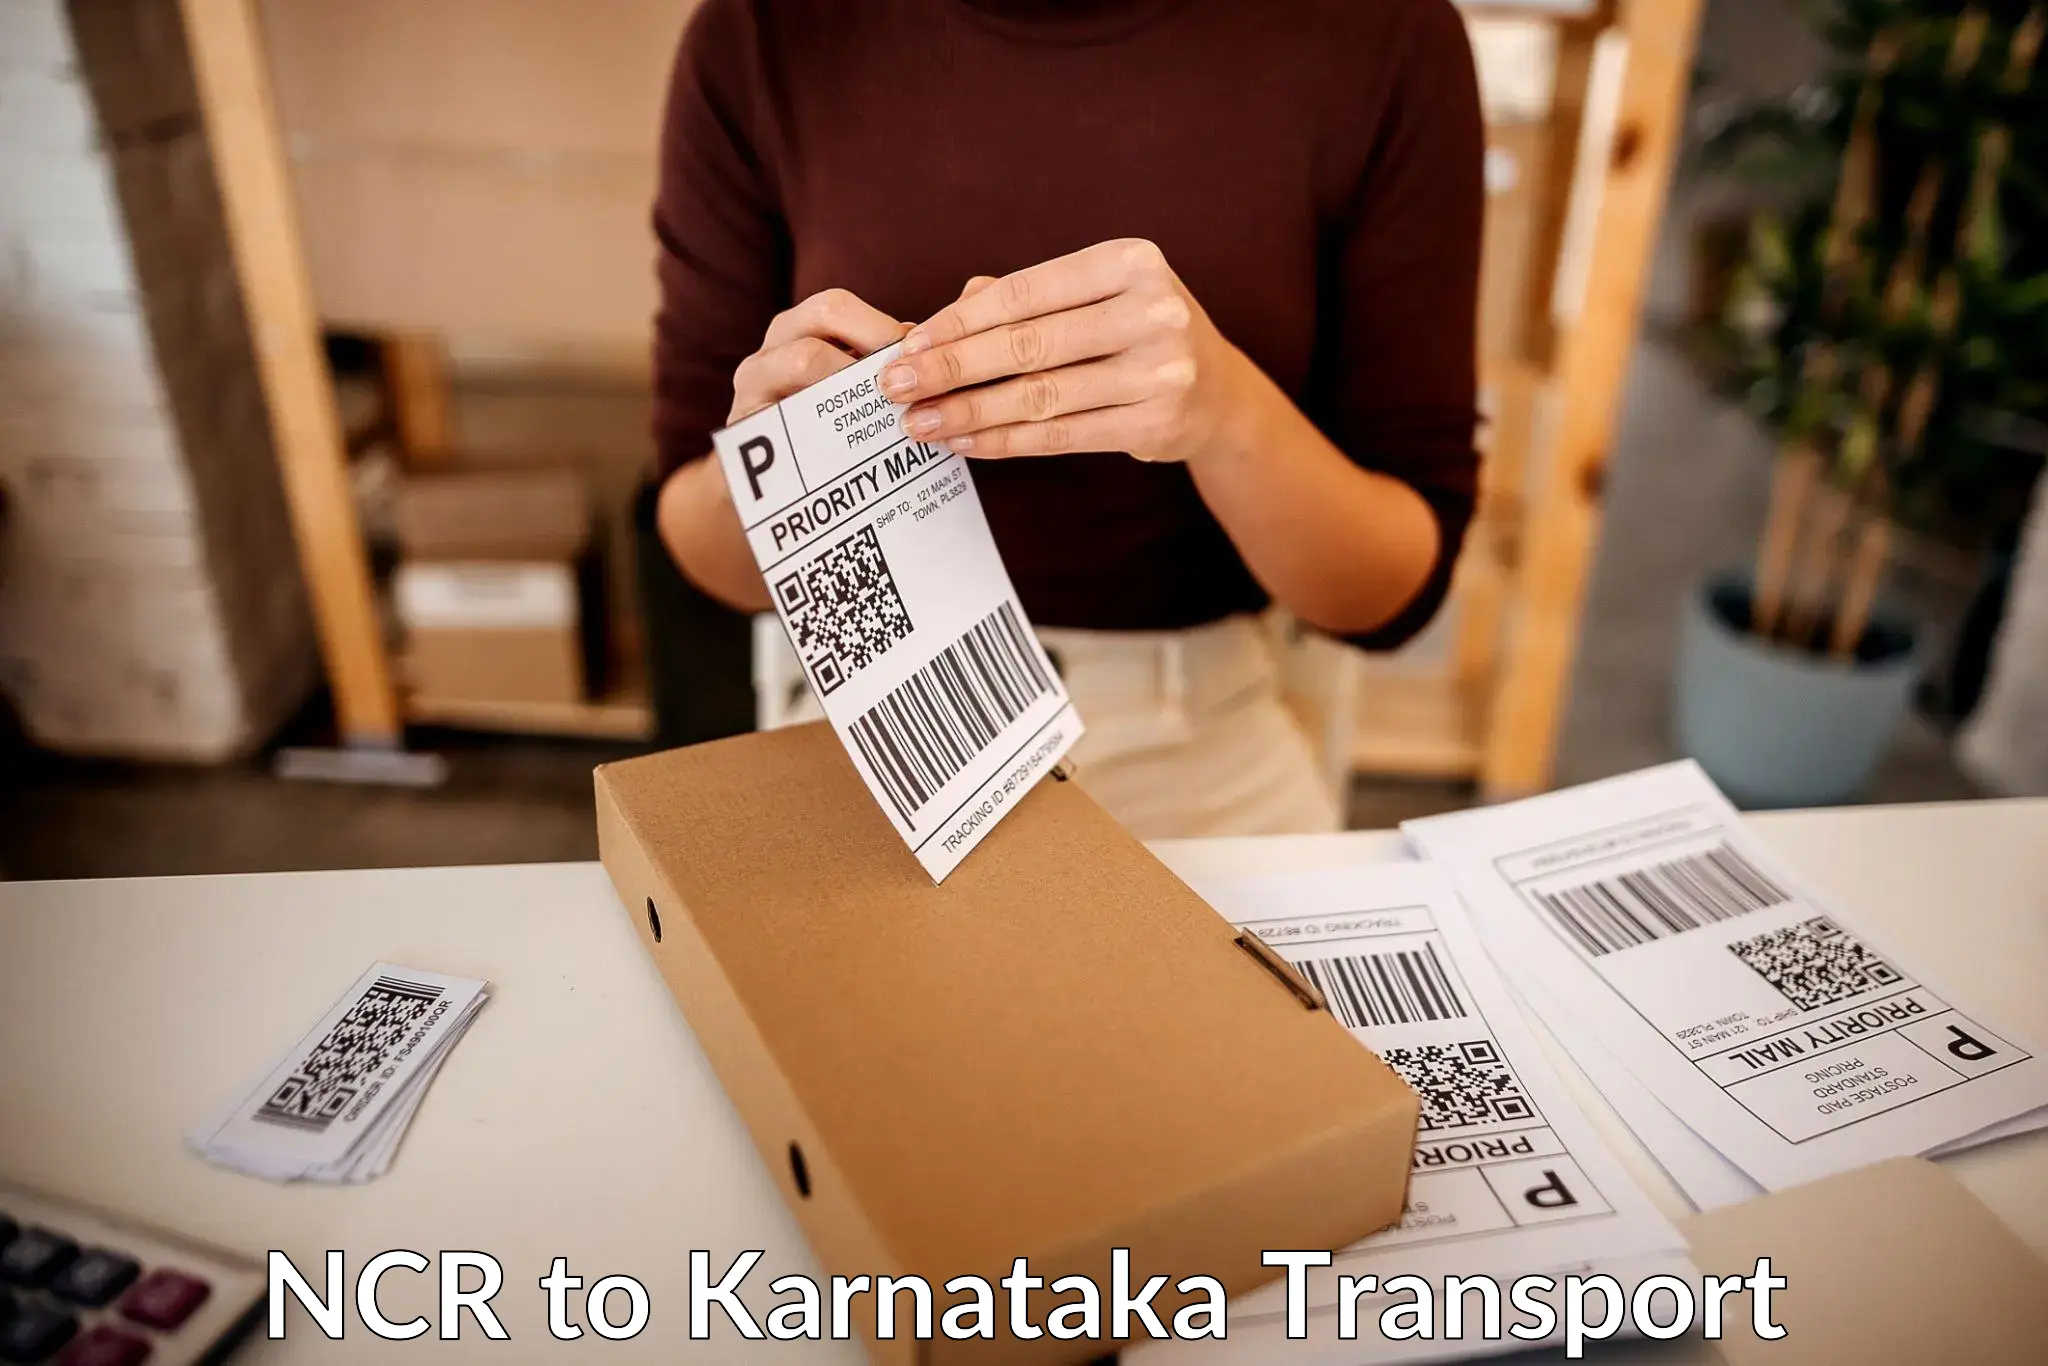 Goods delivery service NCR to Chikkamagaluru